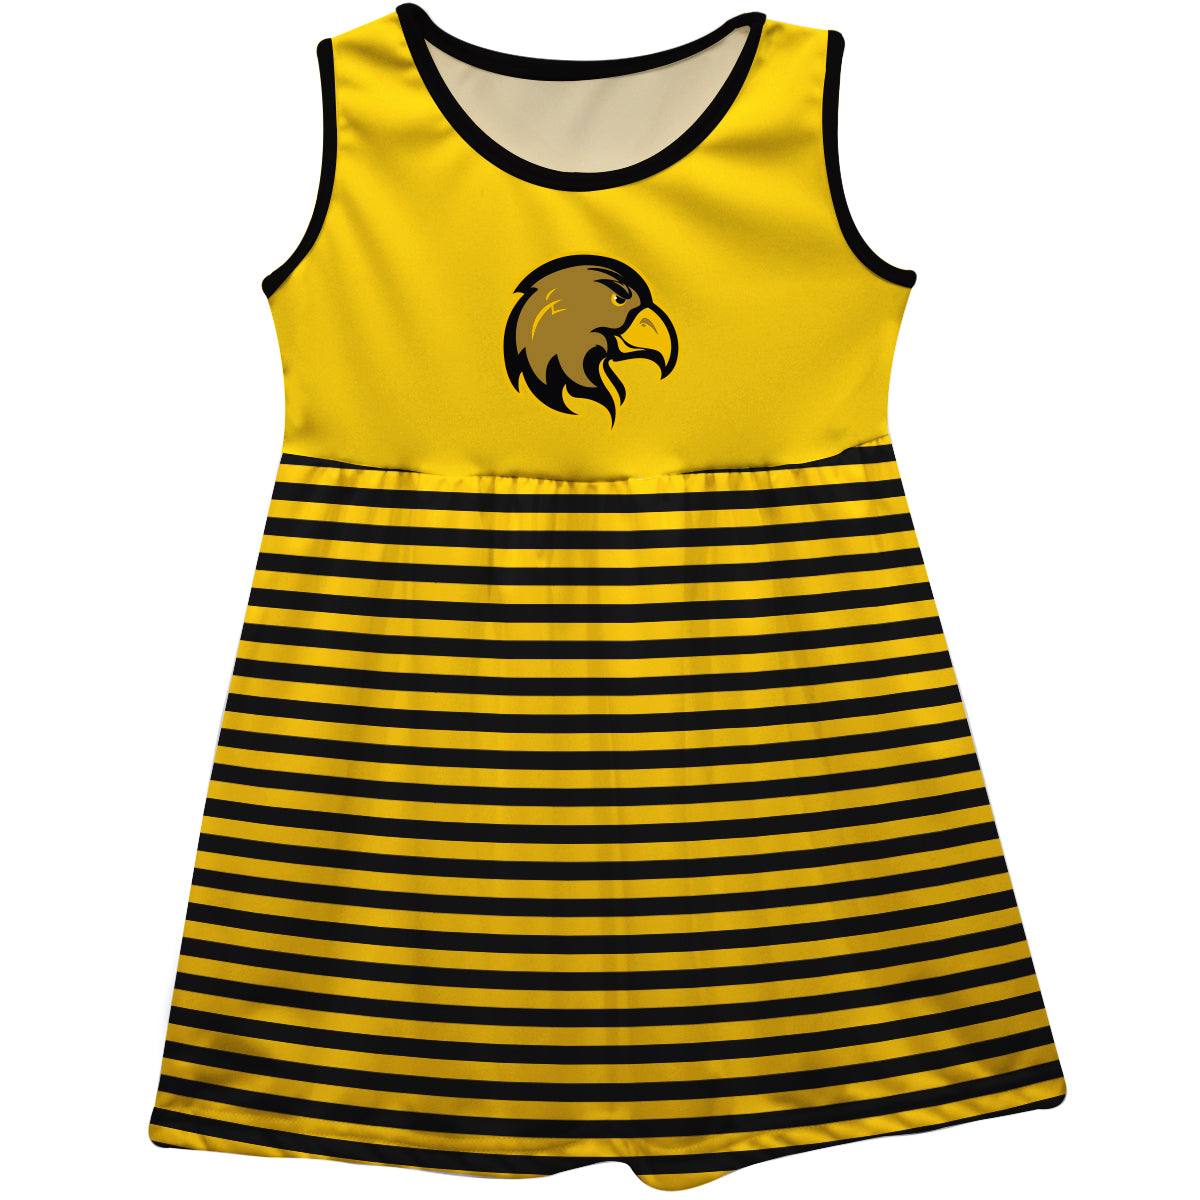 Cal State LA Golden Eagles Girls Game Day Sleeveless Tank Dress Solid Gold Logo Stripes on Skirt by Vive La Fete-Campus-Wardrobe